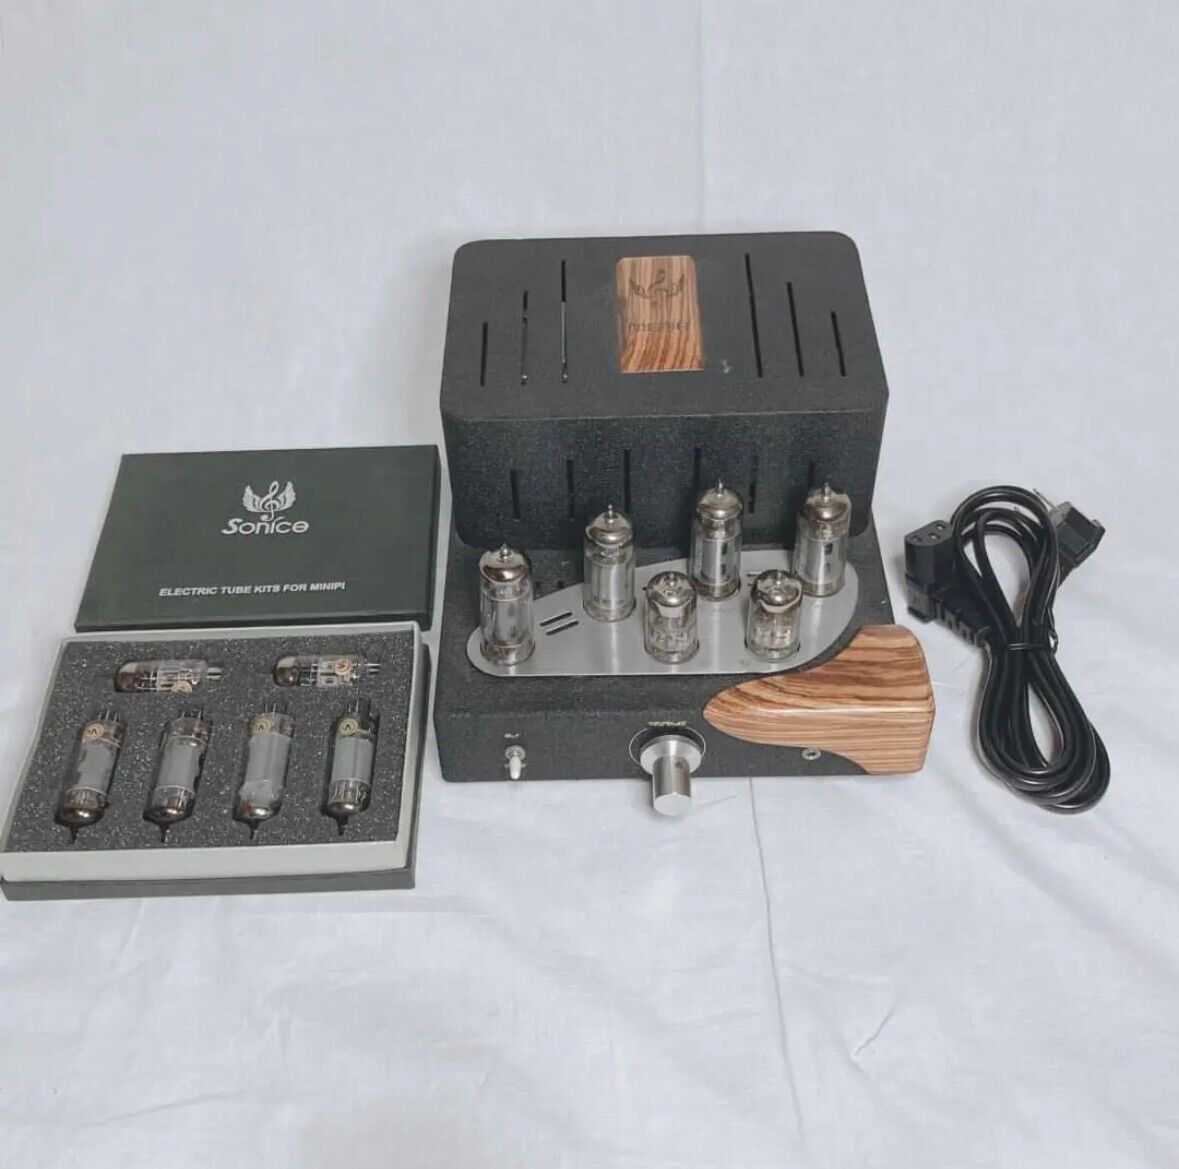 Very beautiful tube amp with 6 vacuum tubes in a compact package.